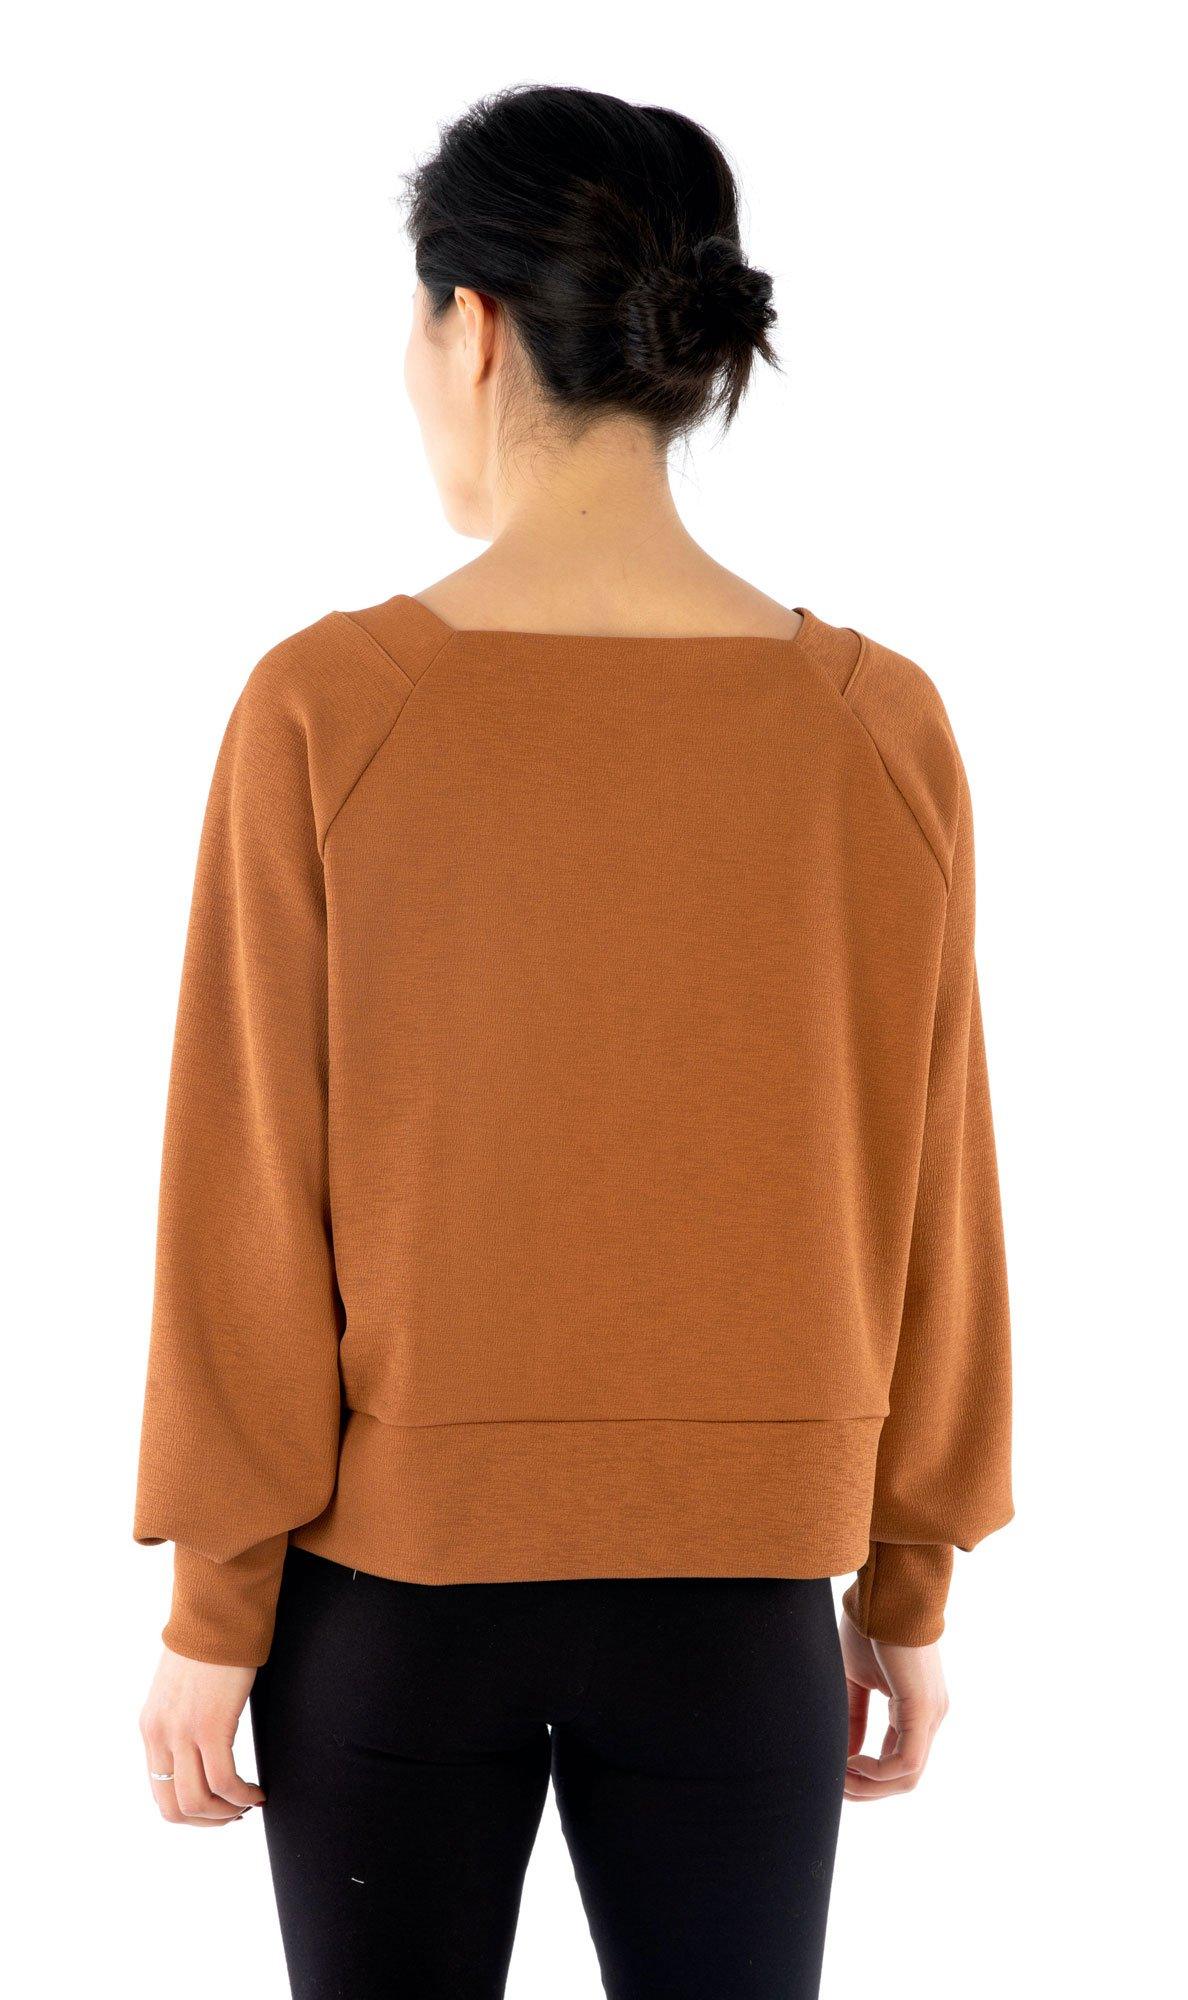 Puff sleeve + square neck